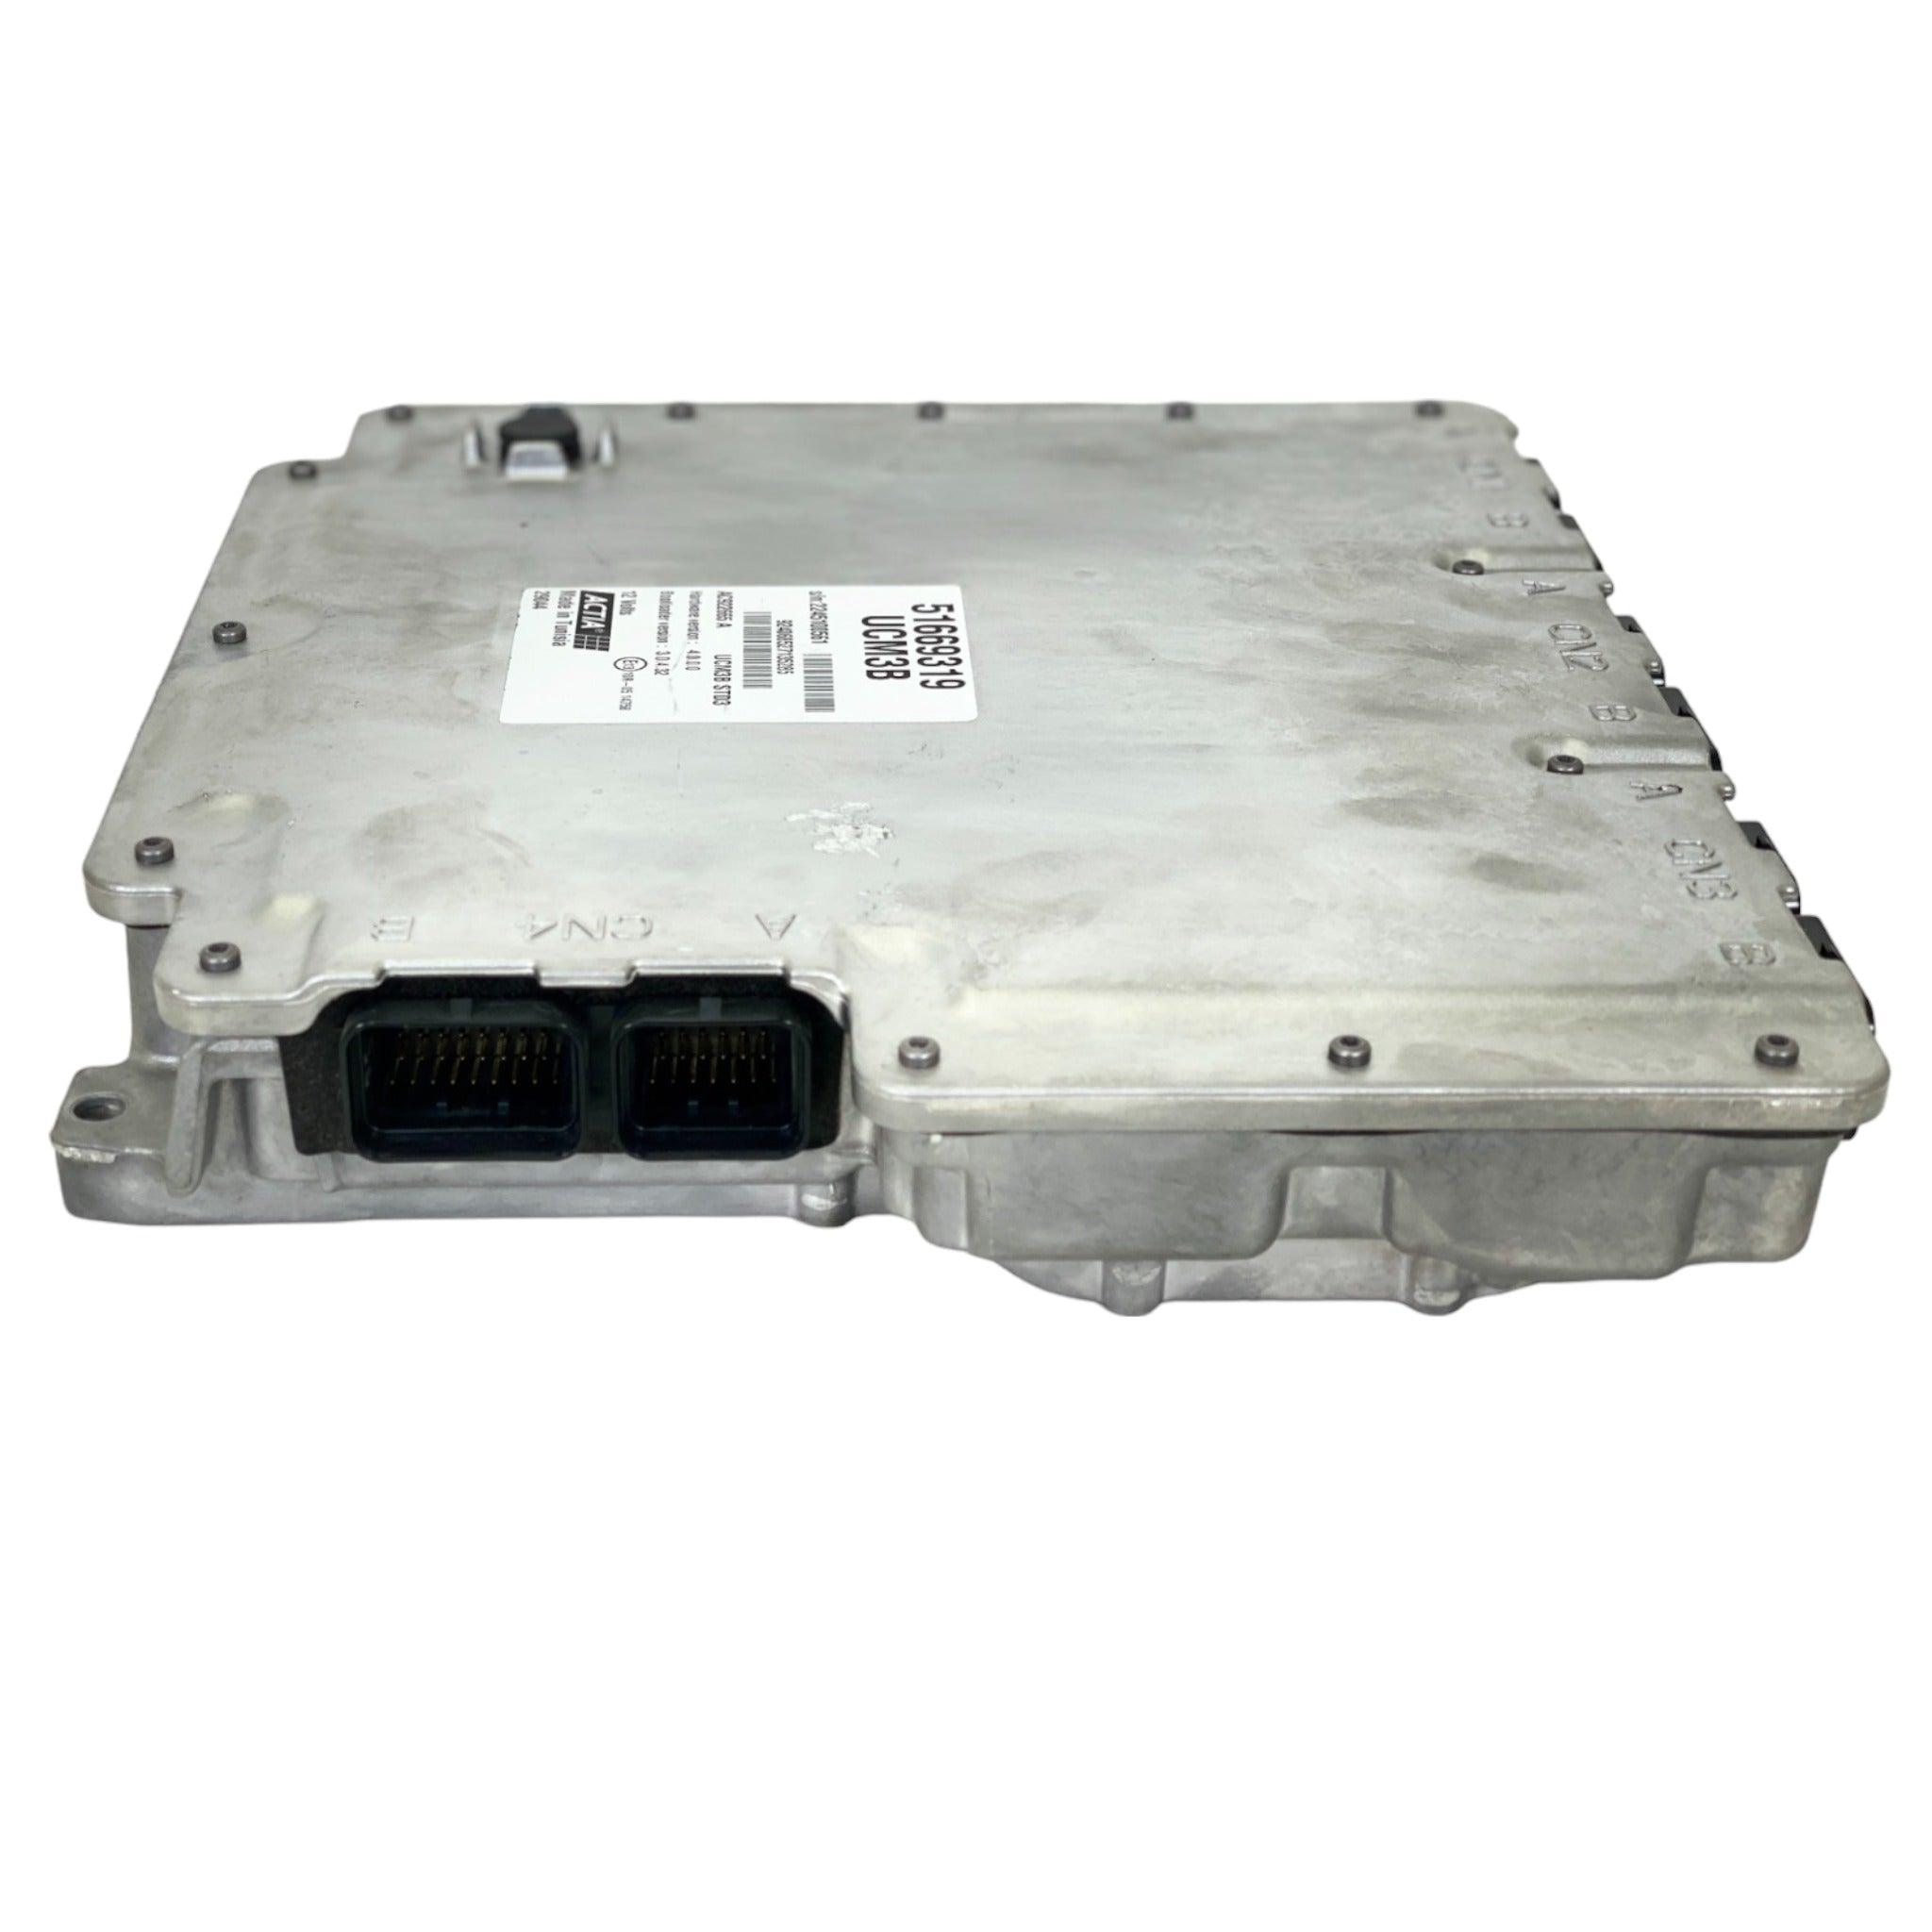 51669319 Genuine Actia Electronic Control Unit For New Holland Case - ADVANCED TRUCK PARTS